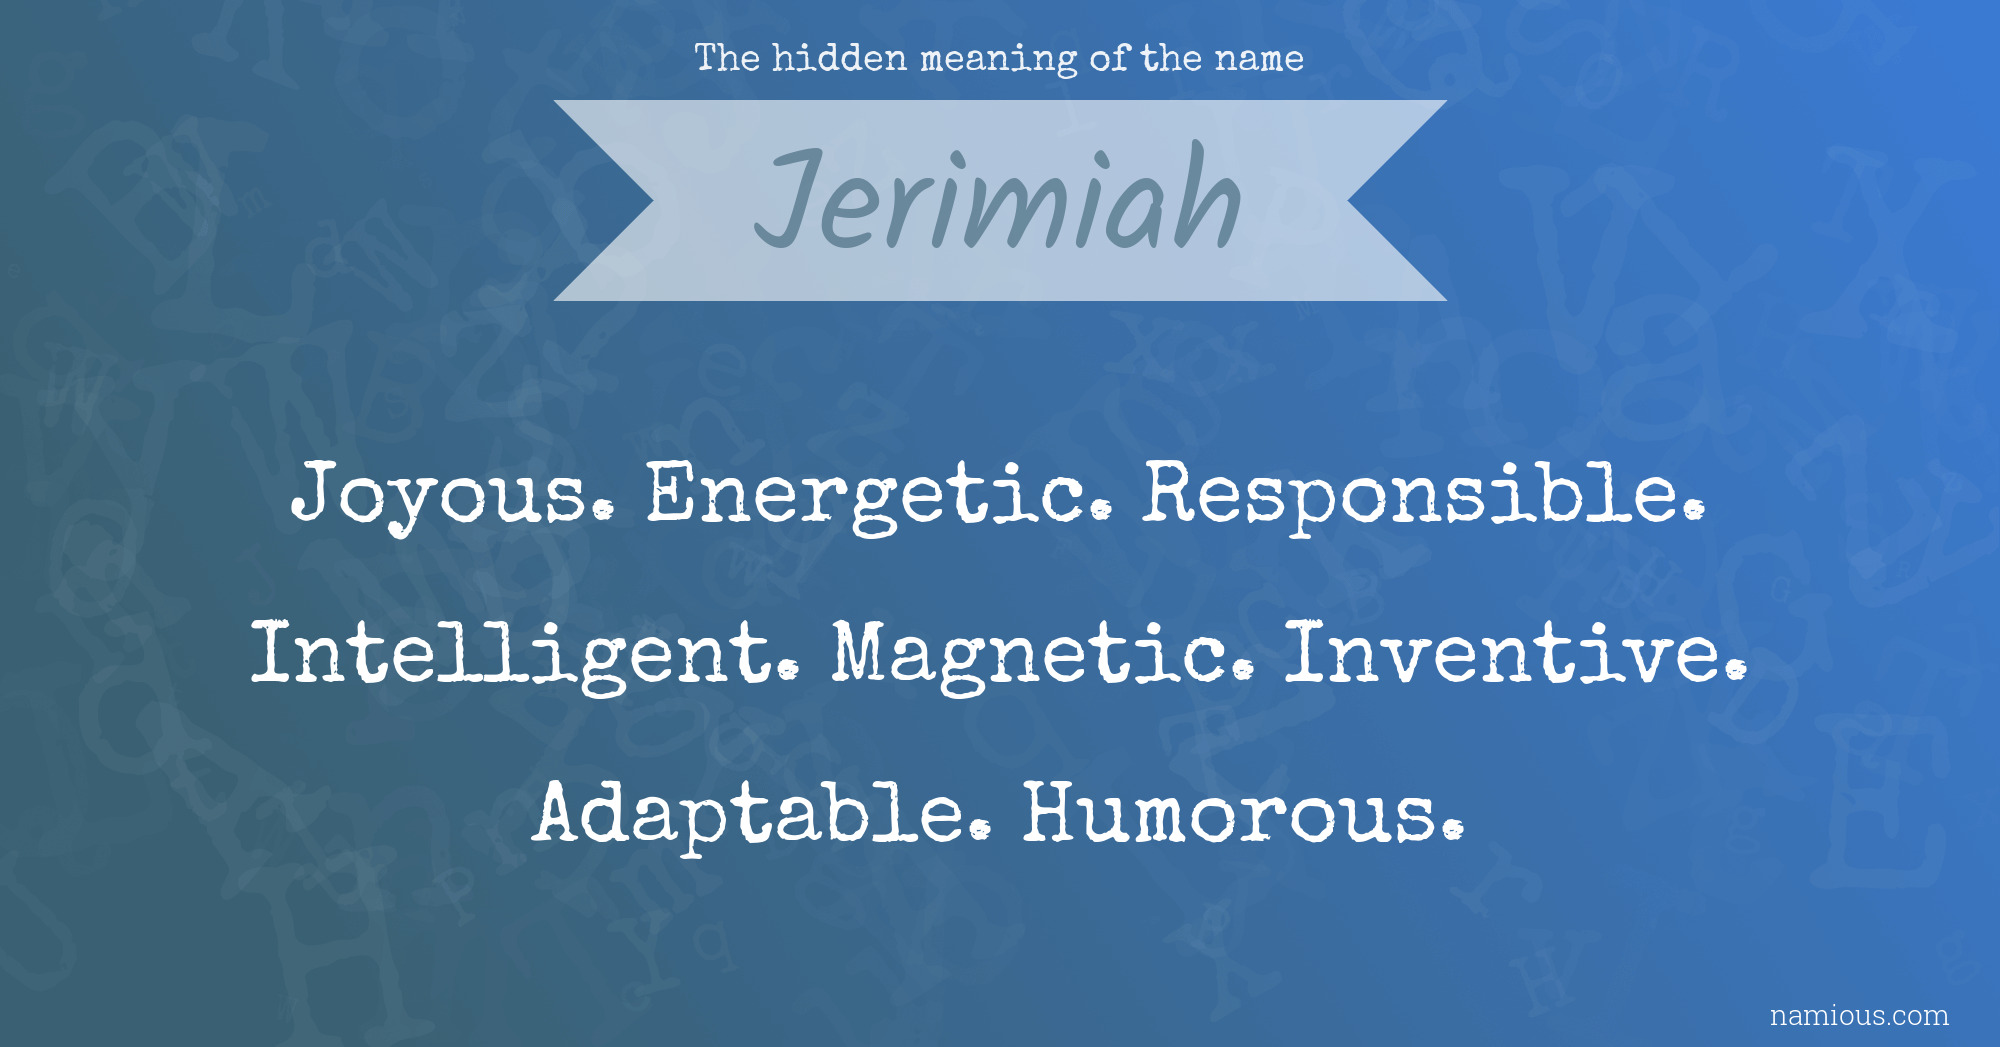 The hidden meaning of the name Jerimiah